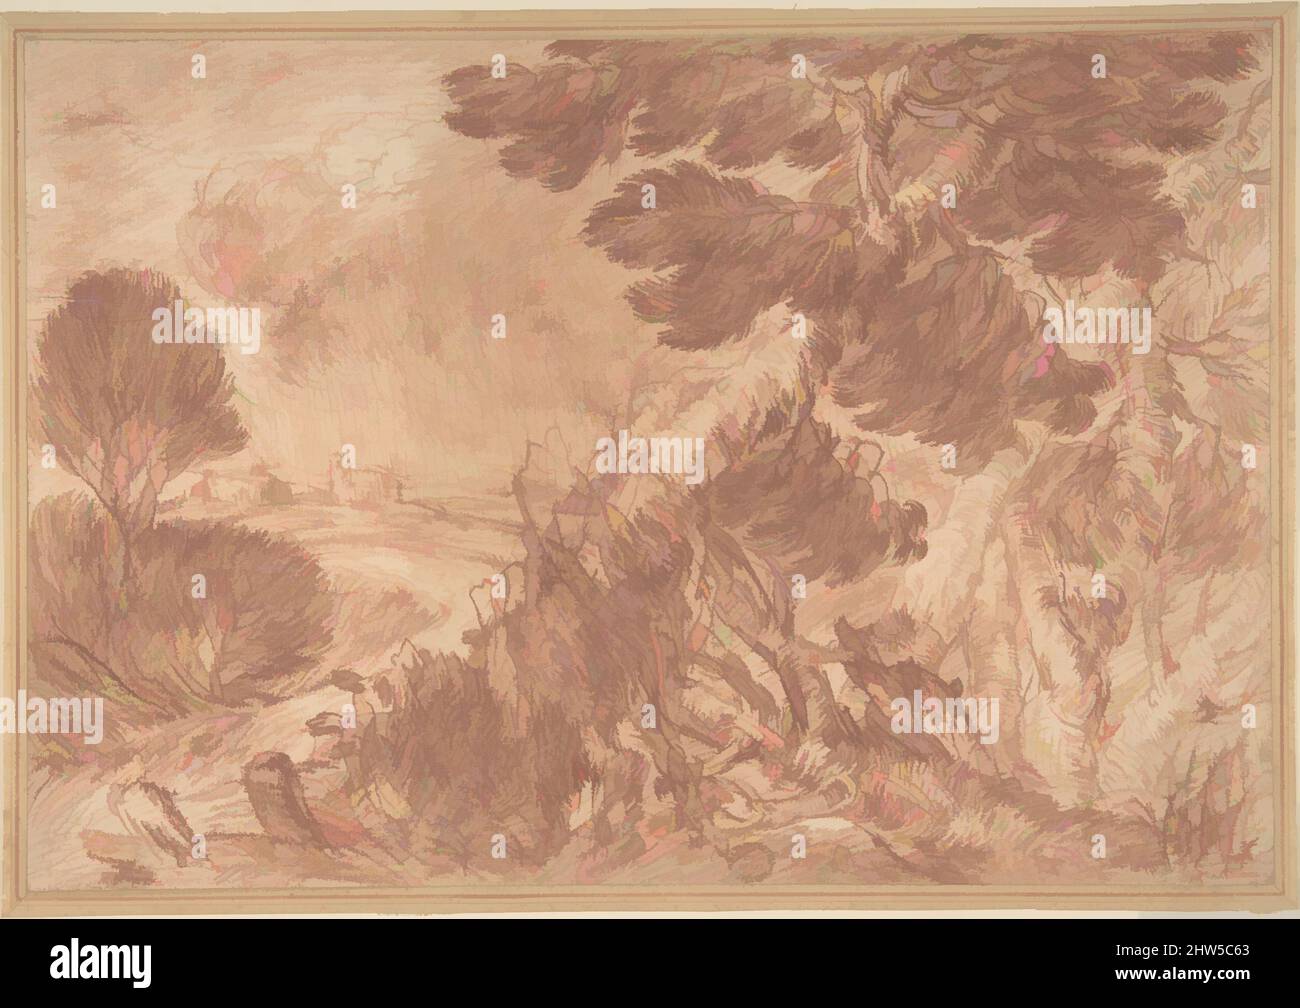 Art inspired by Landscape, 18th century, Red chalk, 12 x 8-3/16 in. (30.5 x 20.8 cm), Drawings, Anonymous, Italian, first half of the 18th century, Classic works modernized by Artotop with a splash of modernity. Shapes, color and value, eye-catching visual impact on art. Emotions through freedom of artworks in a contemporary way. A timeless message pursuing a wildly creative new direction. Artists turning to the digital medium and creating the Artotop NFT Stock Photo